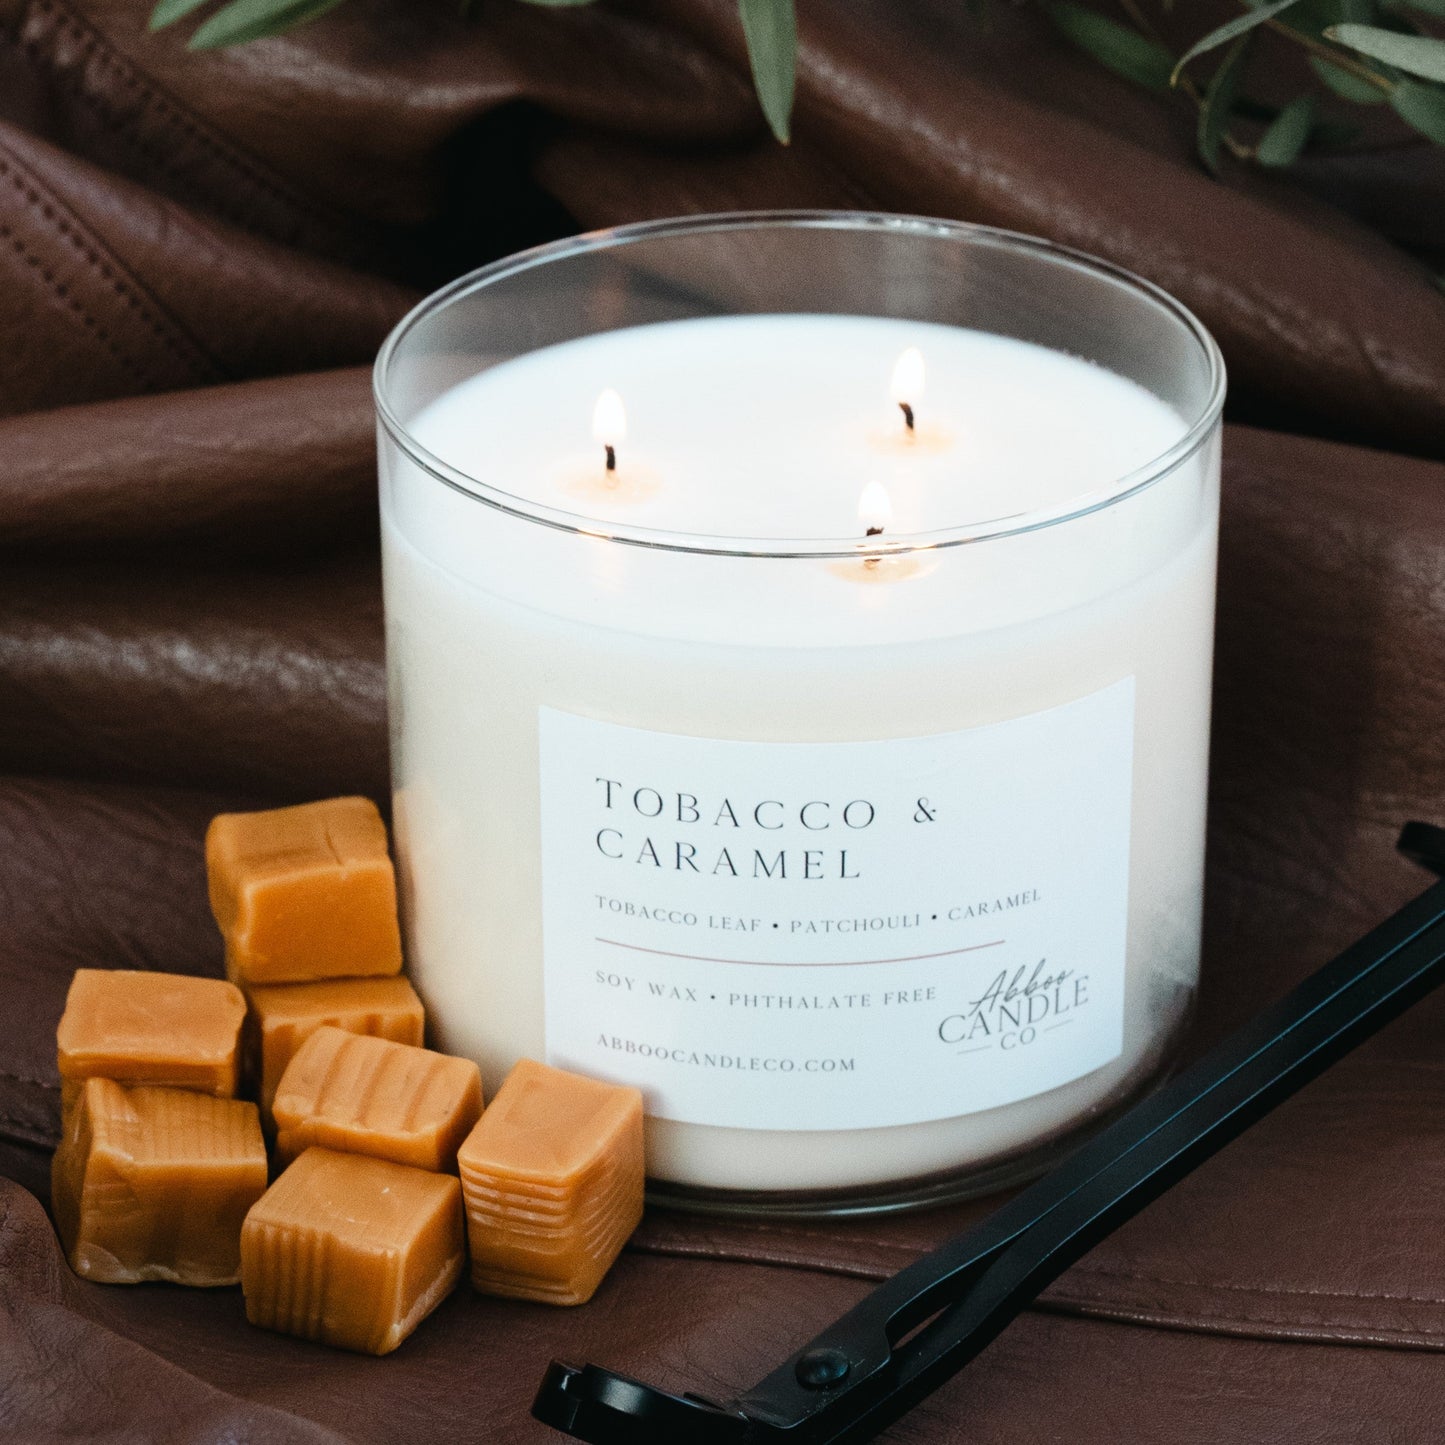 Tobacco and Caramel 3-Wick Soy Candle - Abboo Candle Co® Wholesale